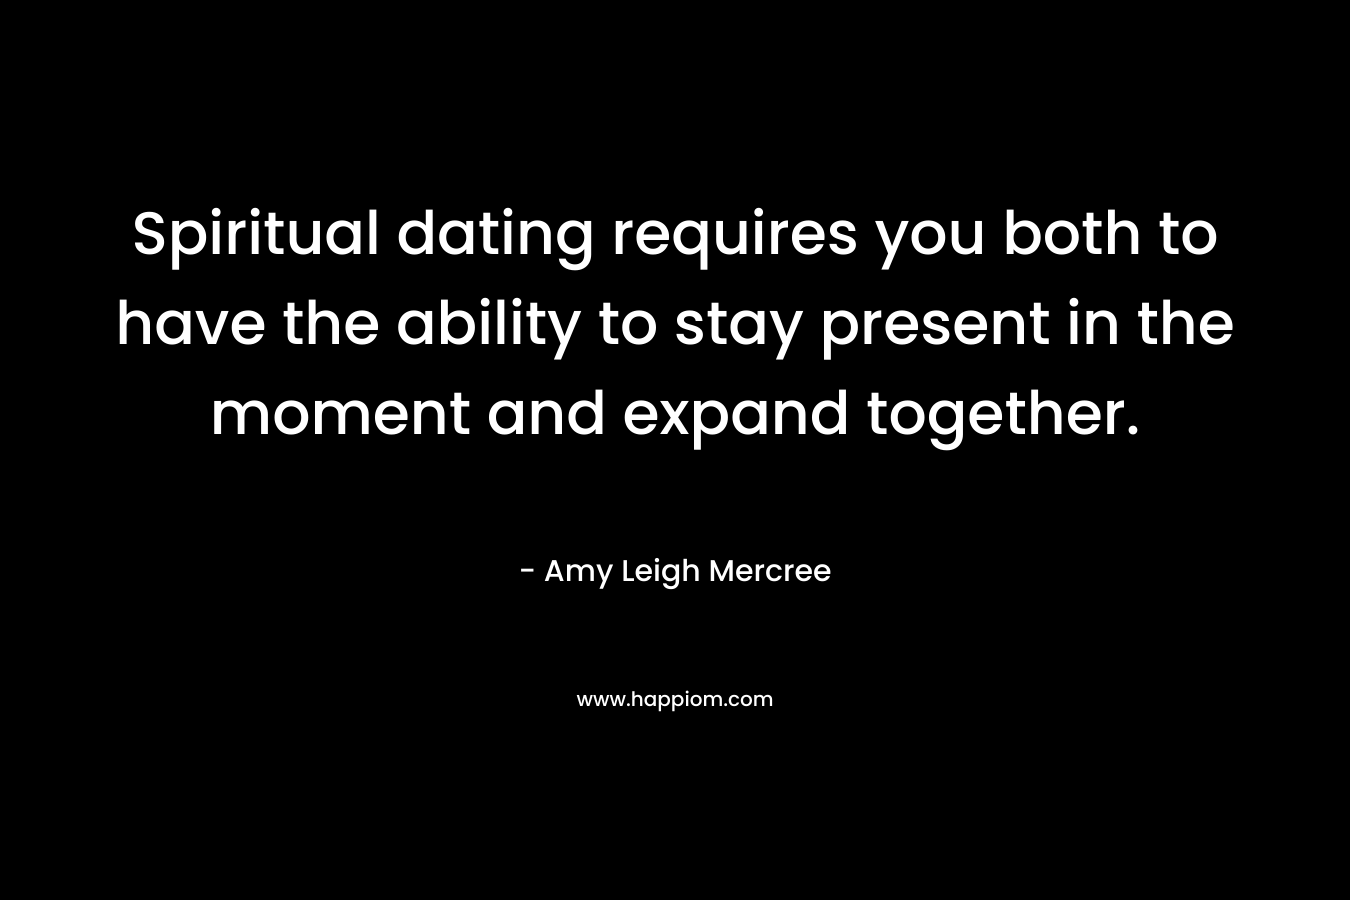 Spiritual dating requires you both to have the ability to stay present in the moment and expand together. – Amy Leigh Mercree